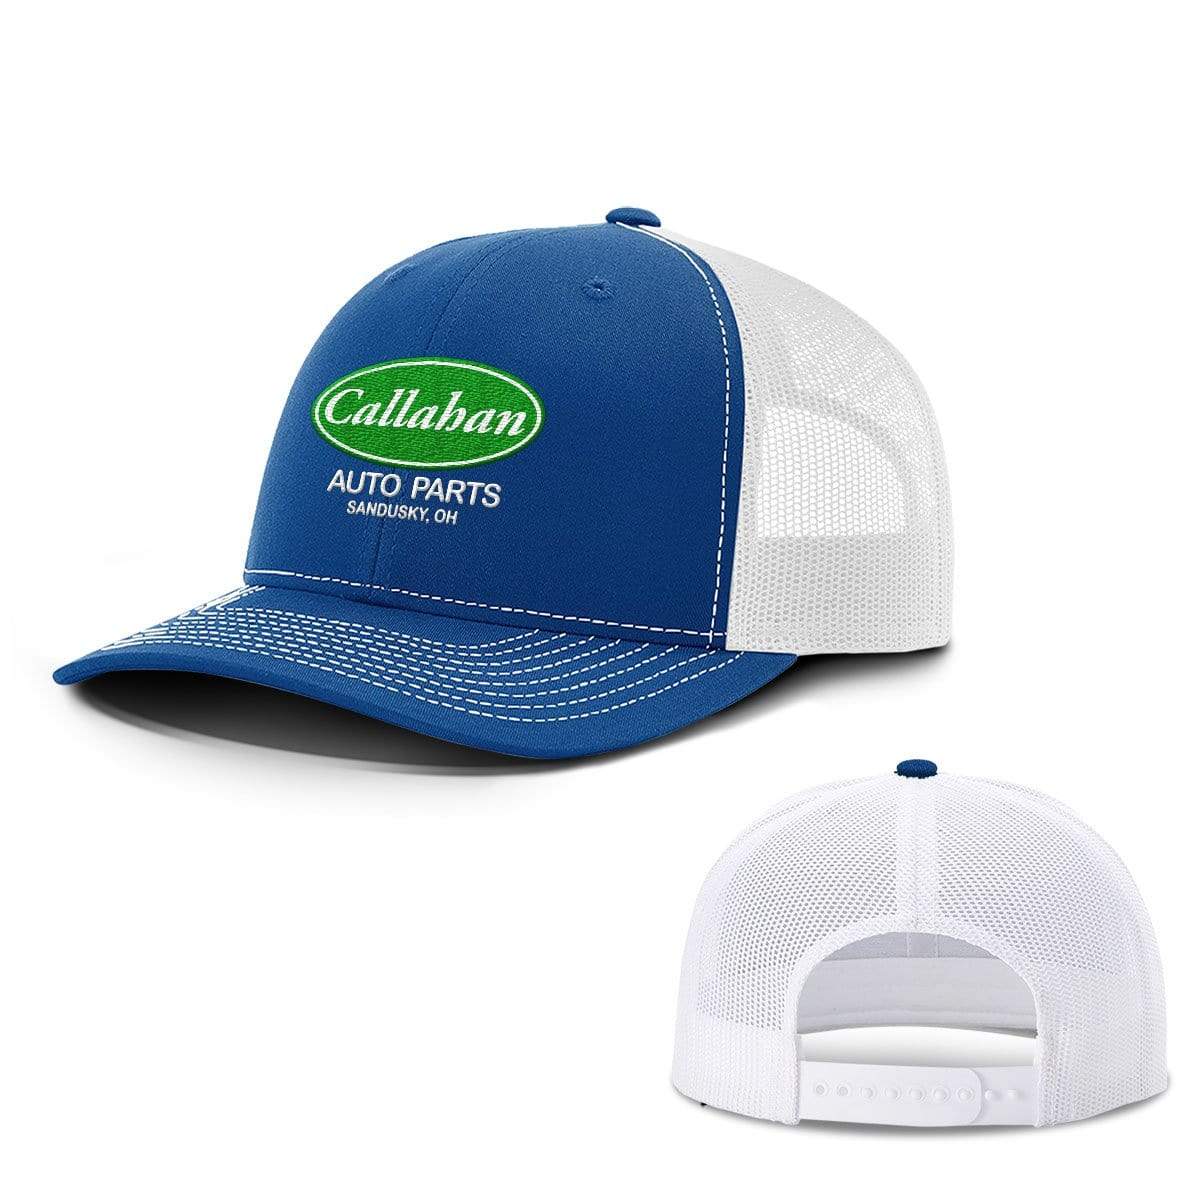 BustedTees.com Snapback / Royal Blue and White / One Size Callahan Auto Parts Hats